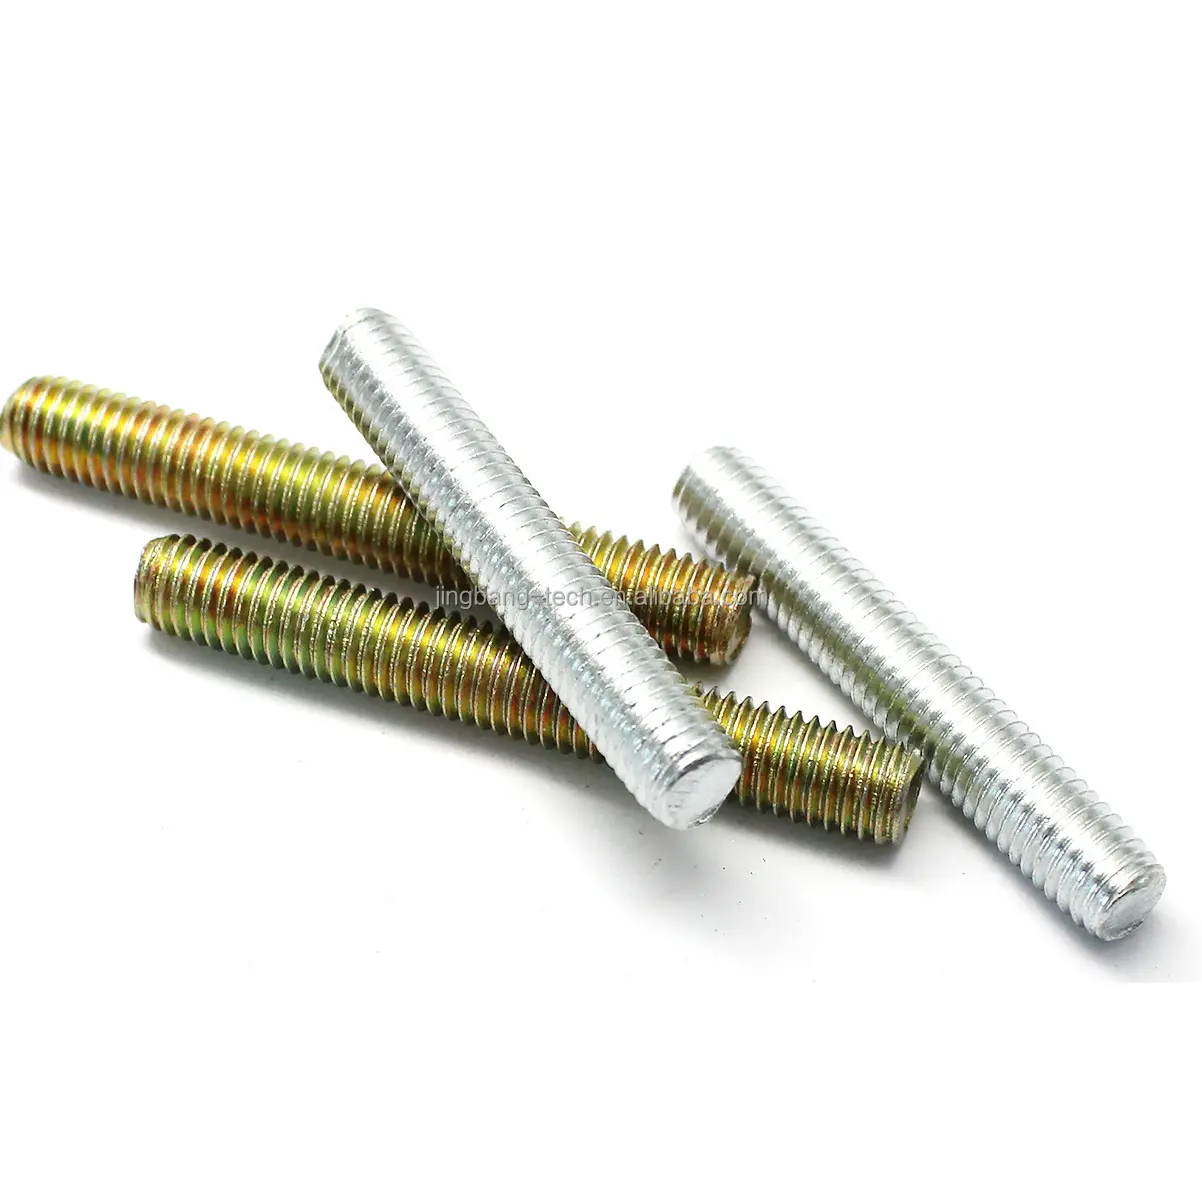 Threaded Thread Steel Stainless Full Galvanized Hollow Black Brass Din975 Bolt Oxide Fully Double M6 High End Screw M8 M10 Rod